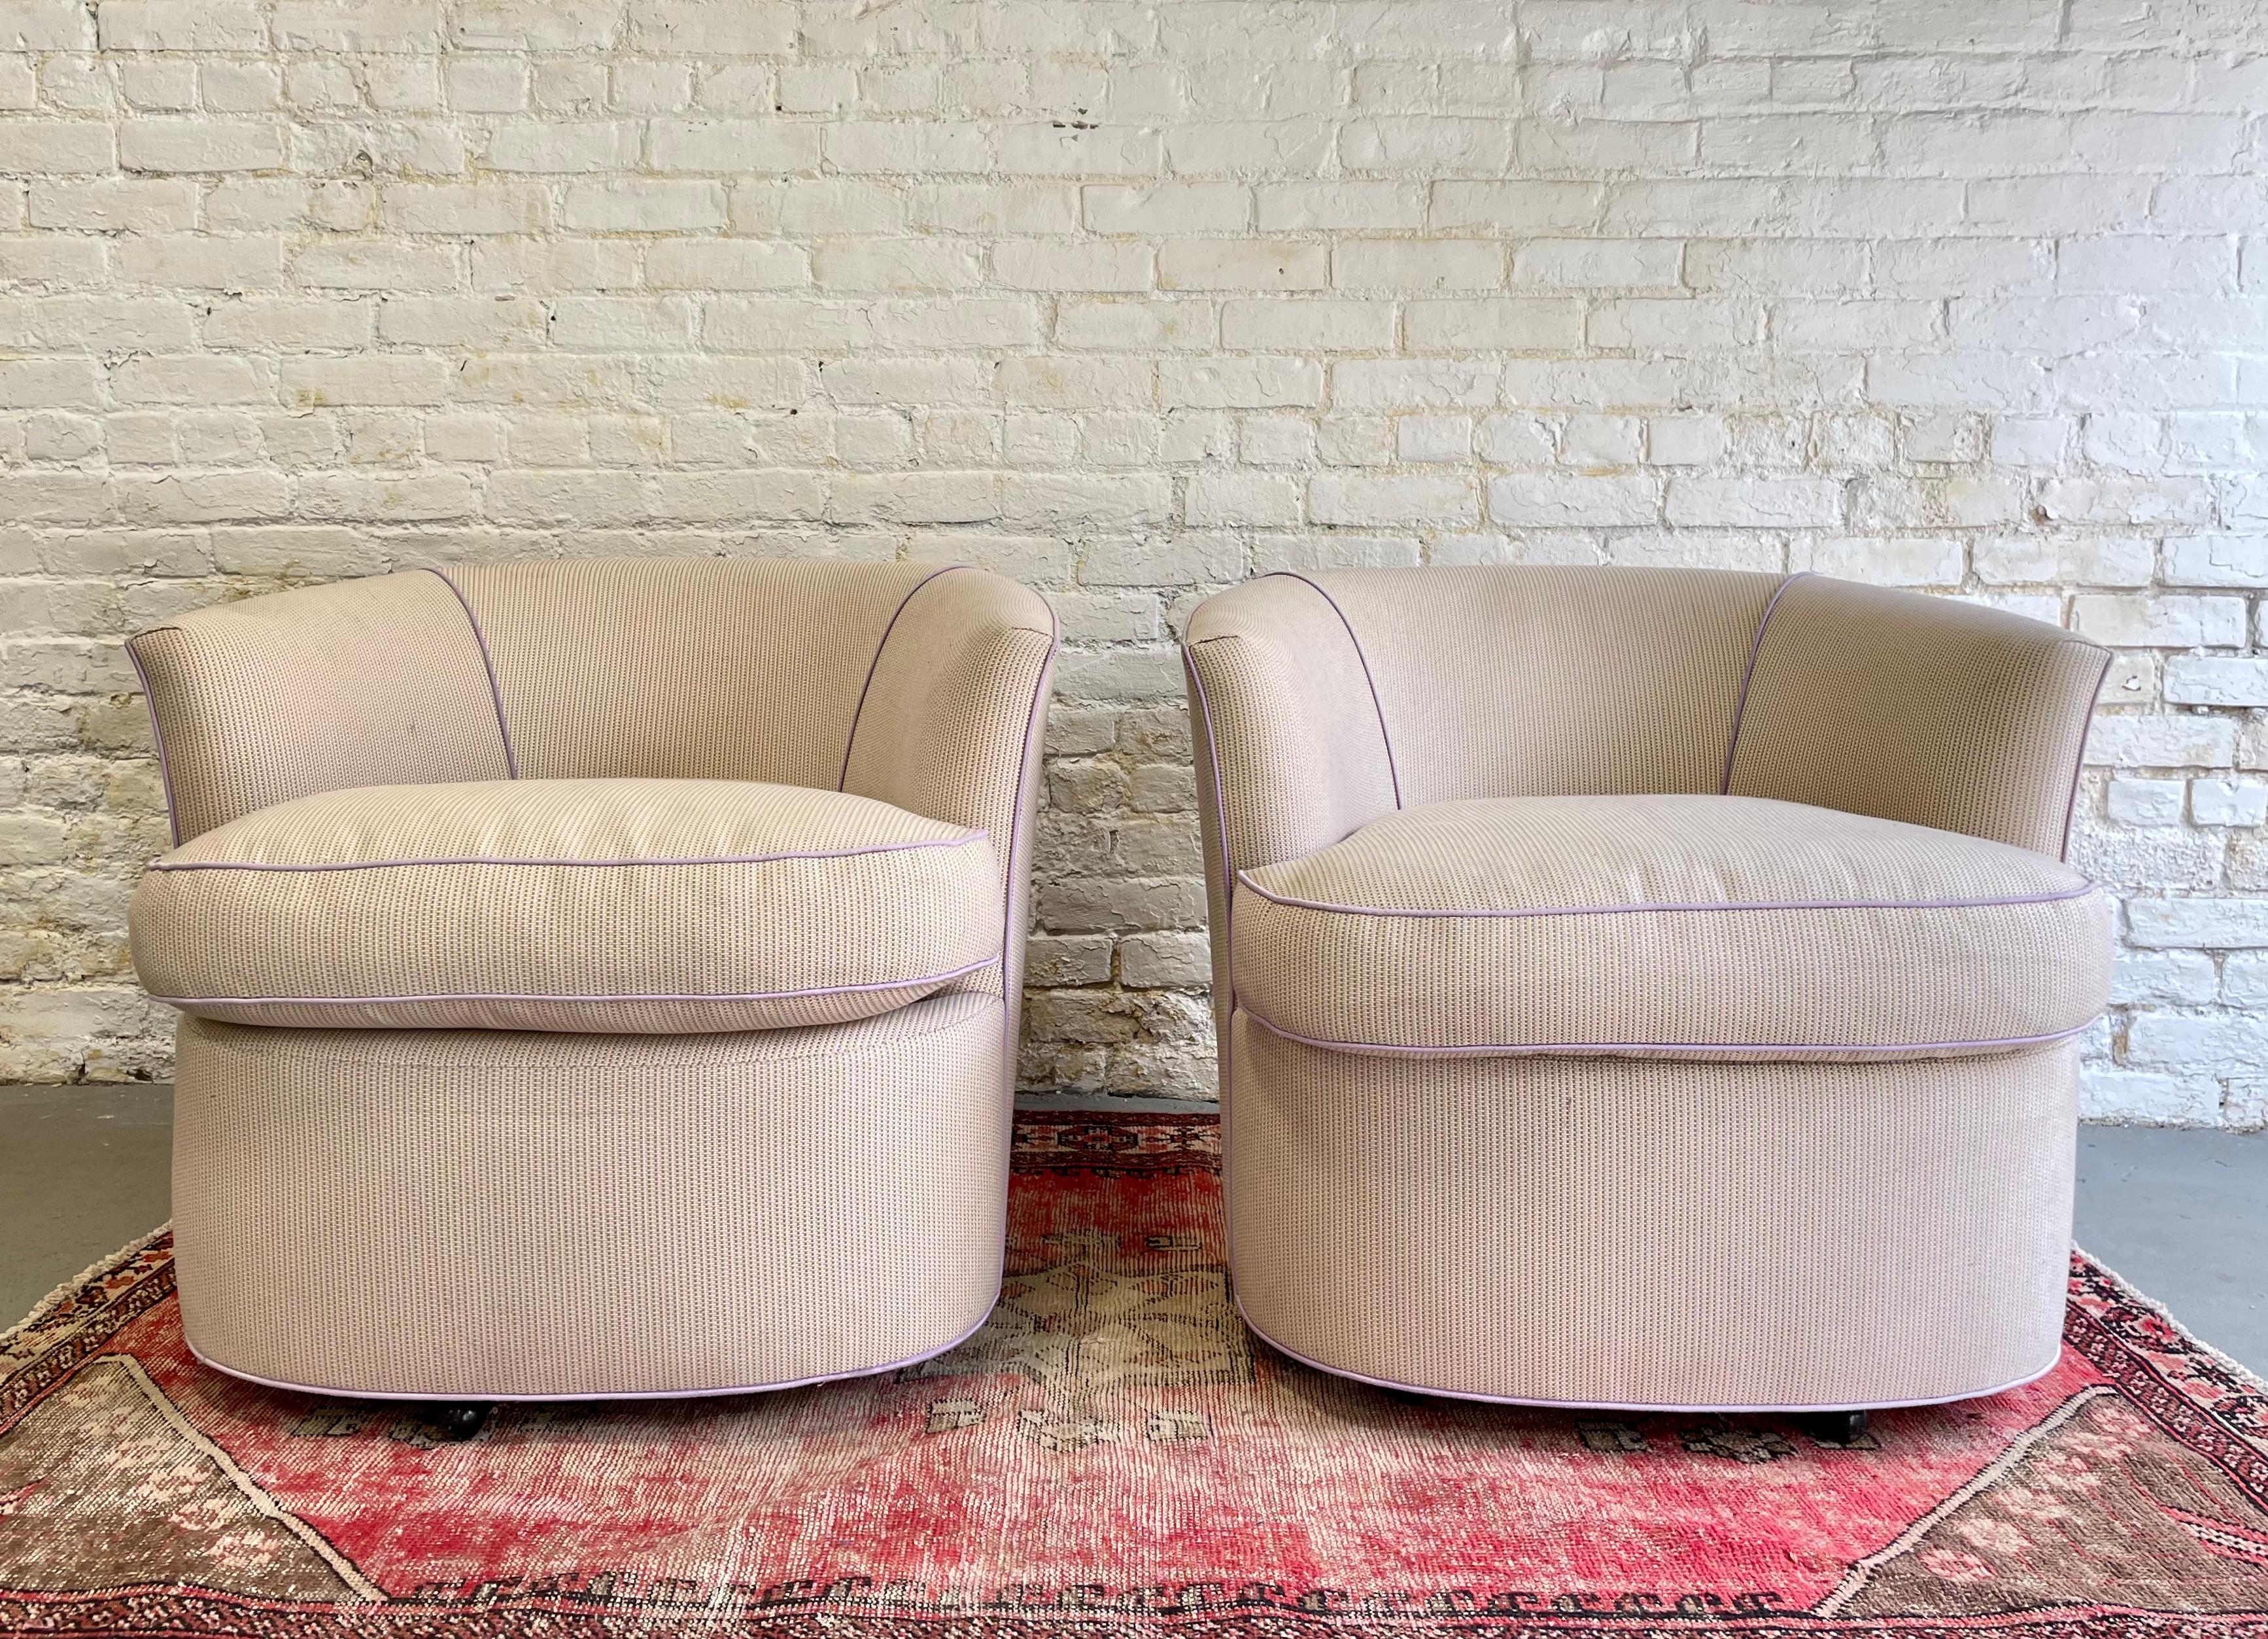 Mid Century Modern / Postmodern Lounge Chairs / club chairs / armchairs in the style of Vladimir Kagan. Smooth and well built swivel mechanism. Lovely cream upholstery with hints of lavender and lime green that add a touch of color to the fabric